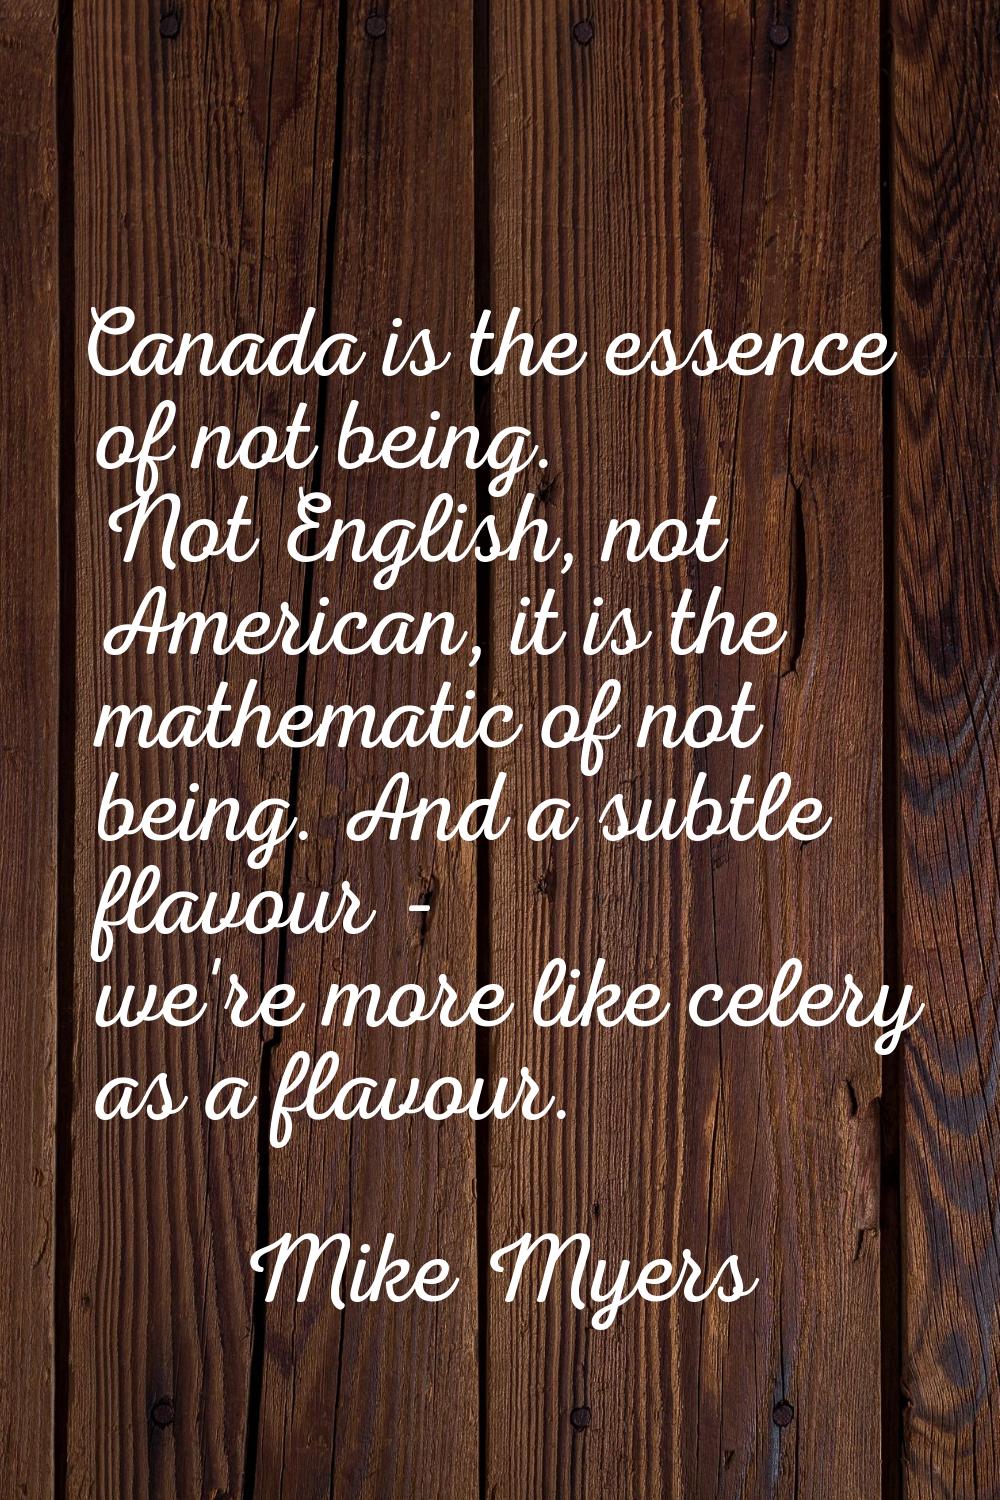 Canada is the essence of not being. Not English, not American, it is the mathematic of not being. A